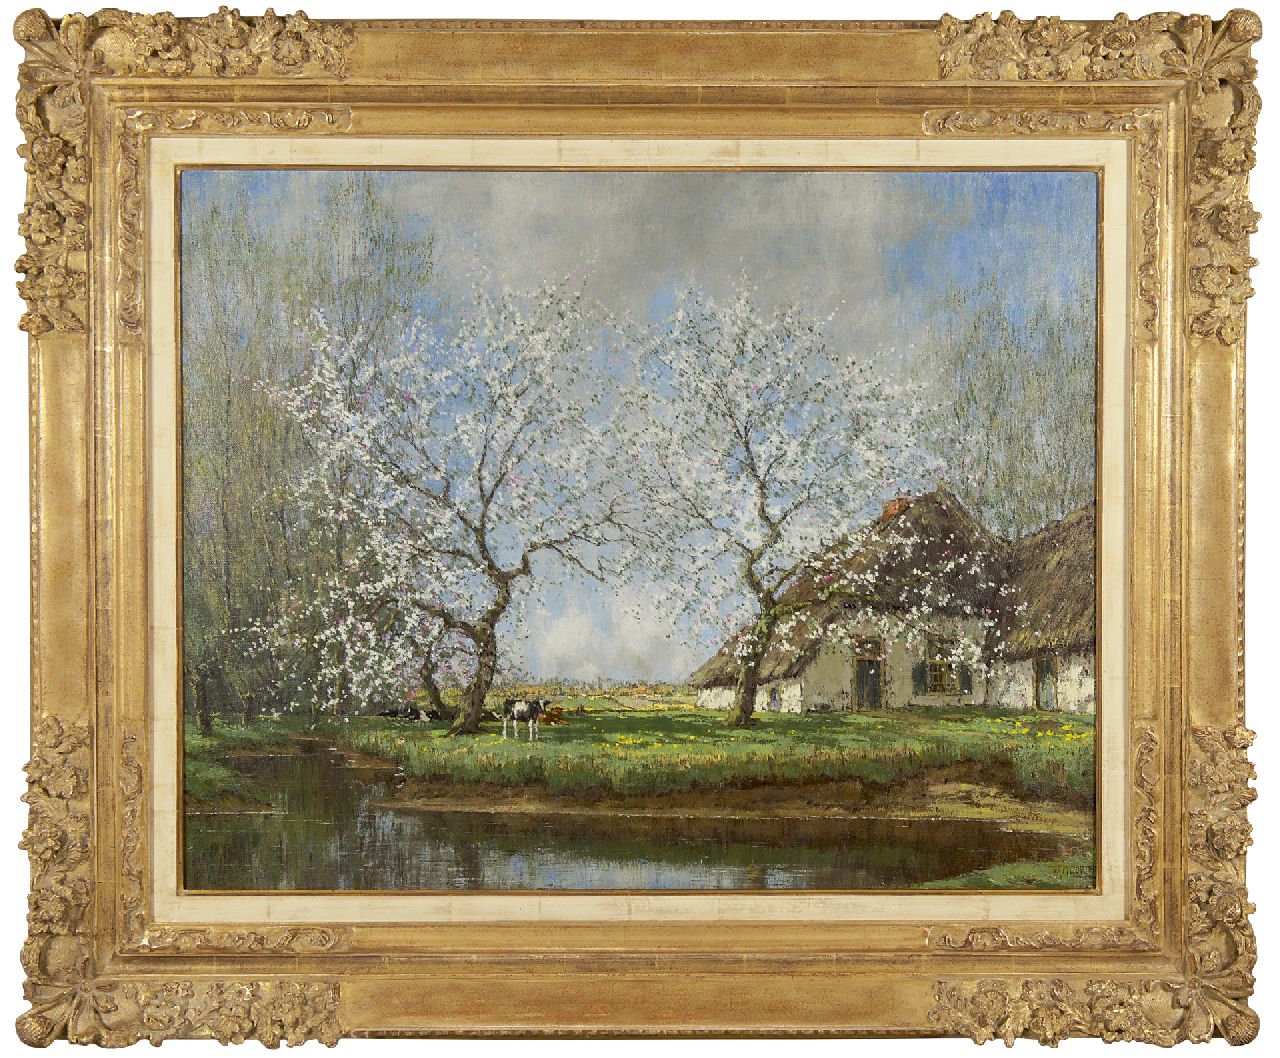 Gorter A.M.  | 'Arnold' Marc Gorter, Spring morning, oil on canvas 62.2 x 79.3 cm, signed l.r.